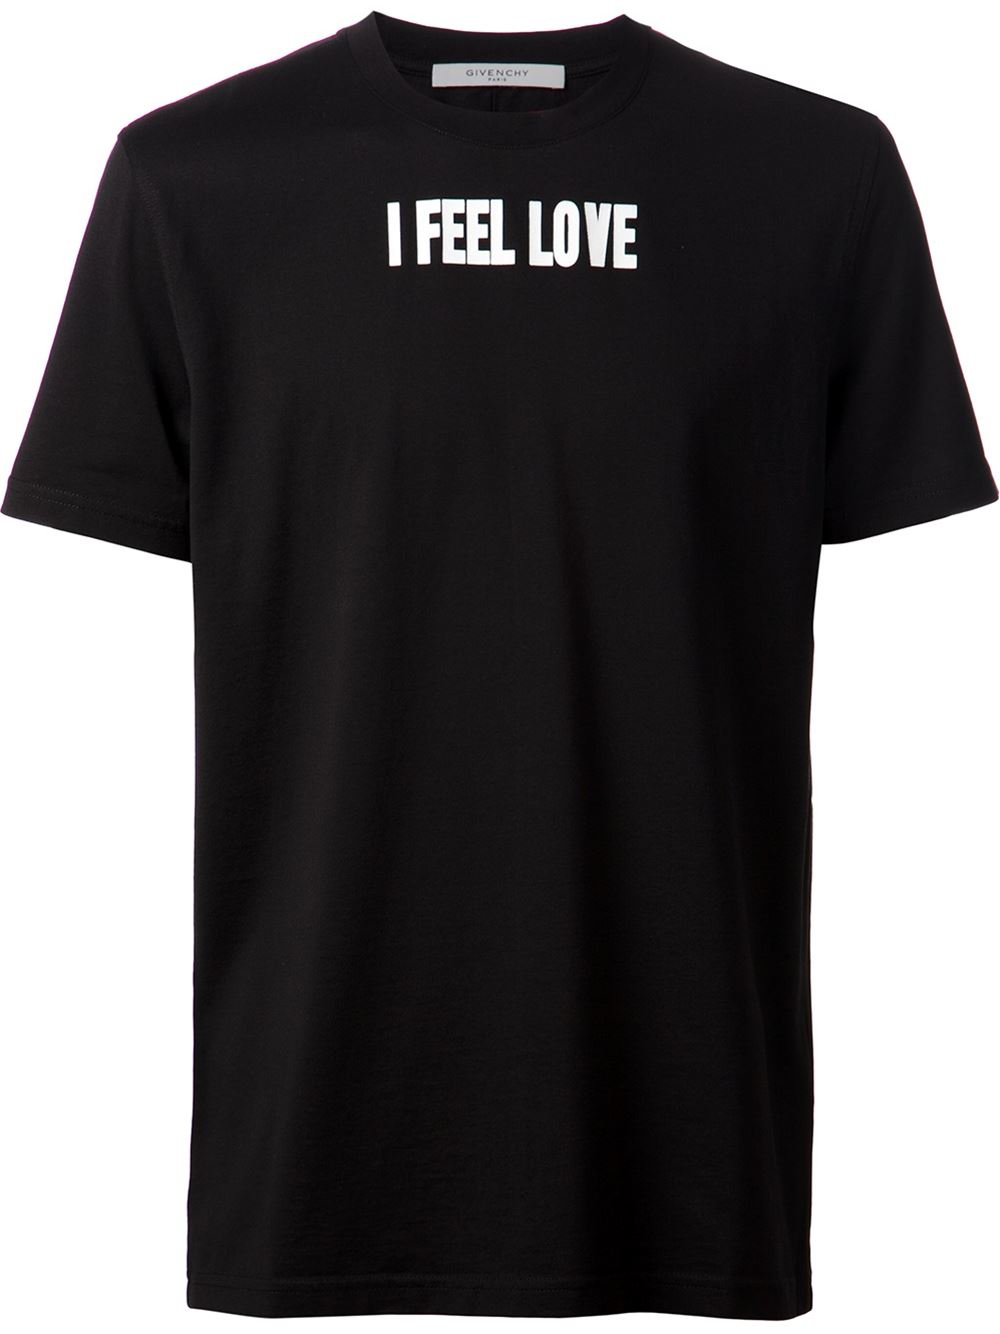 Givenchy I Feel Love T-Shirt in Black 